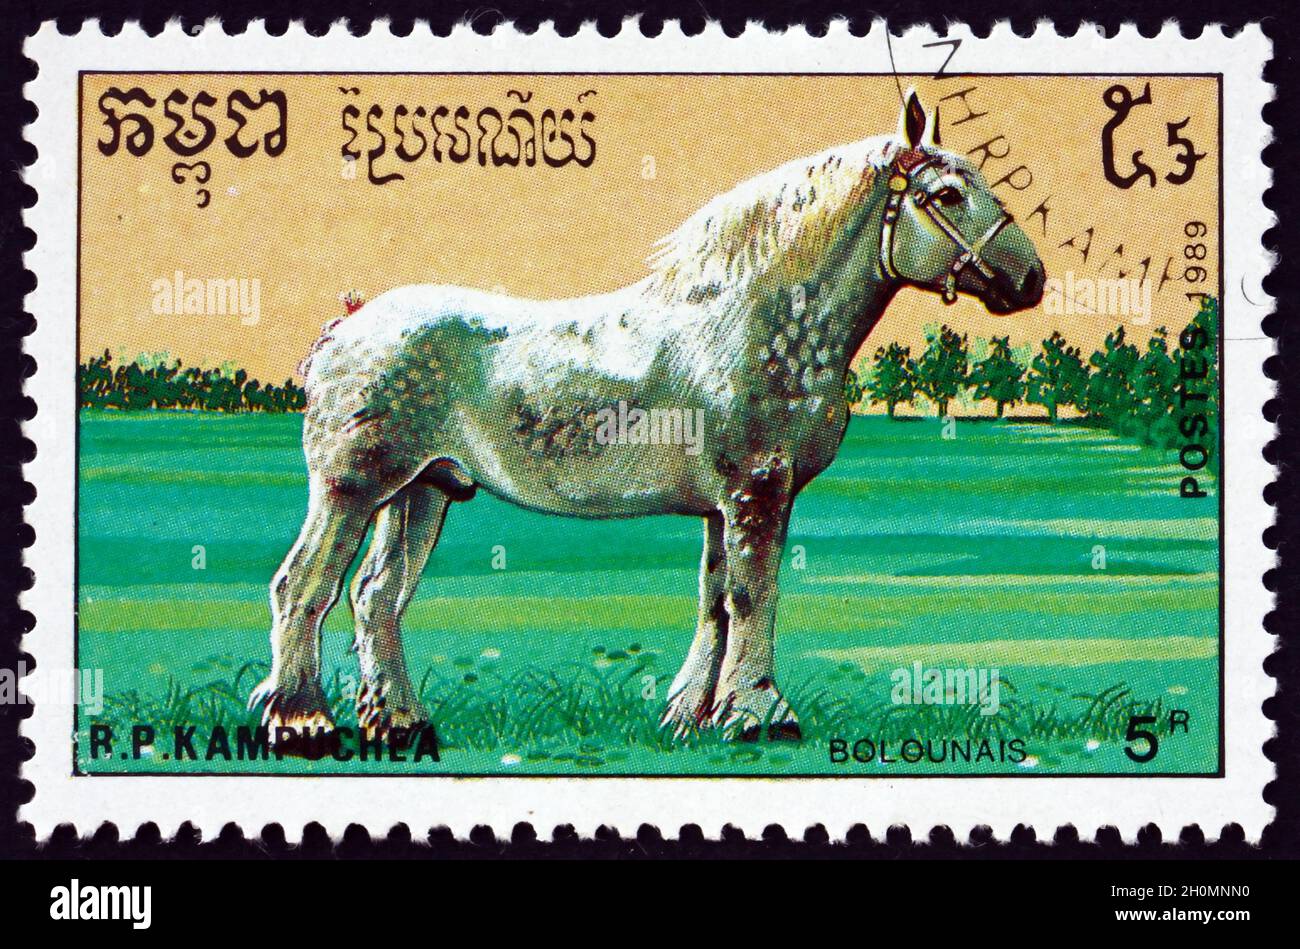 CAMBODIA - CIRCA 1989: a stamp printed in Cambodia shows boulonnais, is a French breed of draft horse, circa 1989 Stock Photo